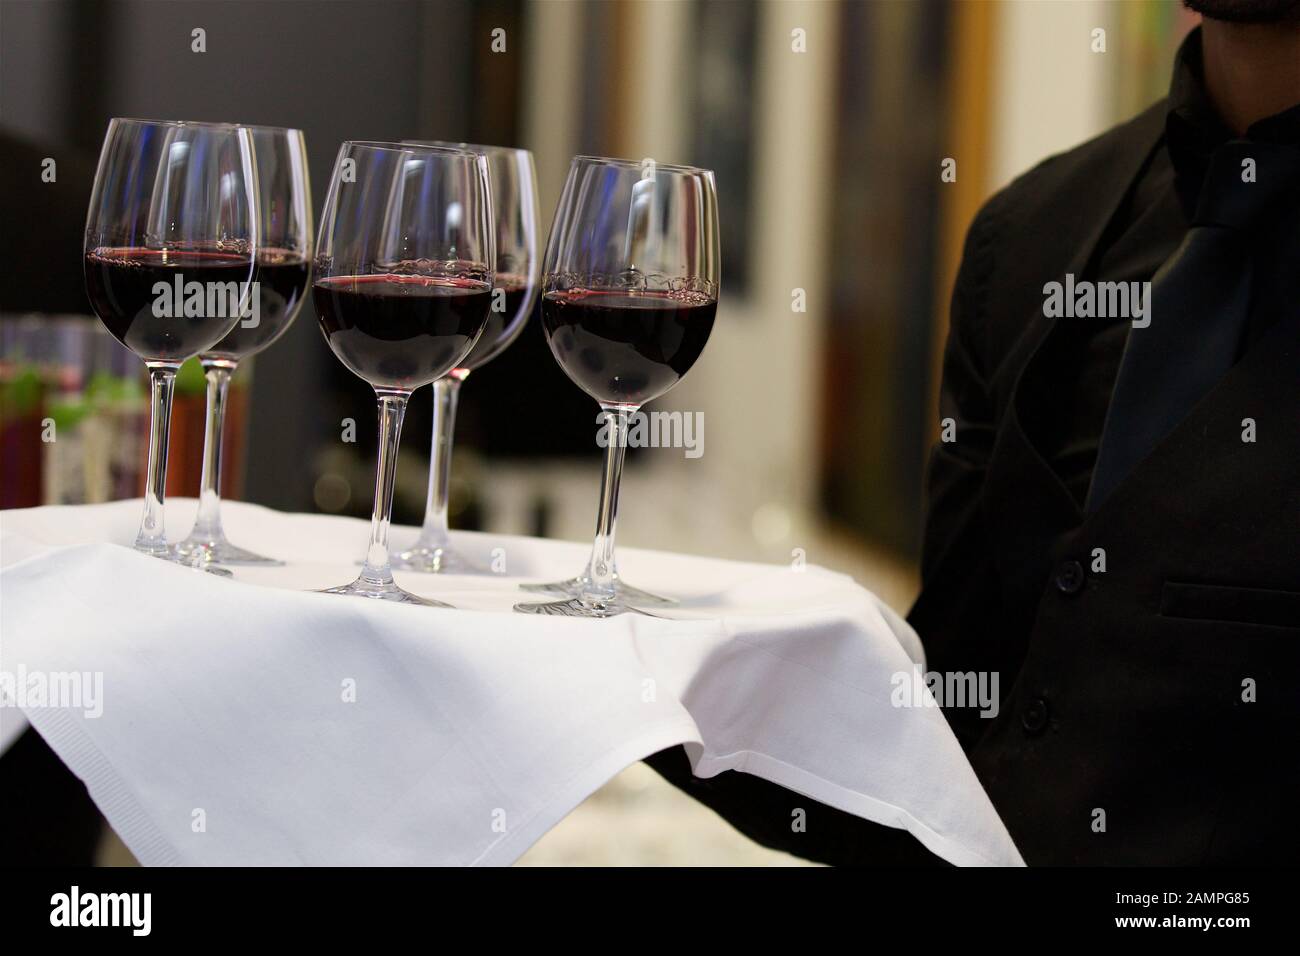 A waiter serving glasses of red wine on a tray. Stock Photo